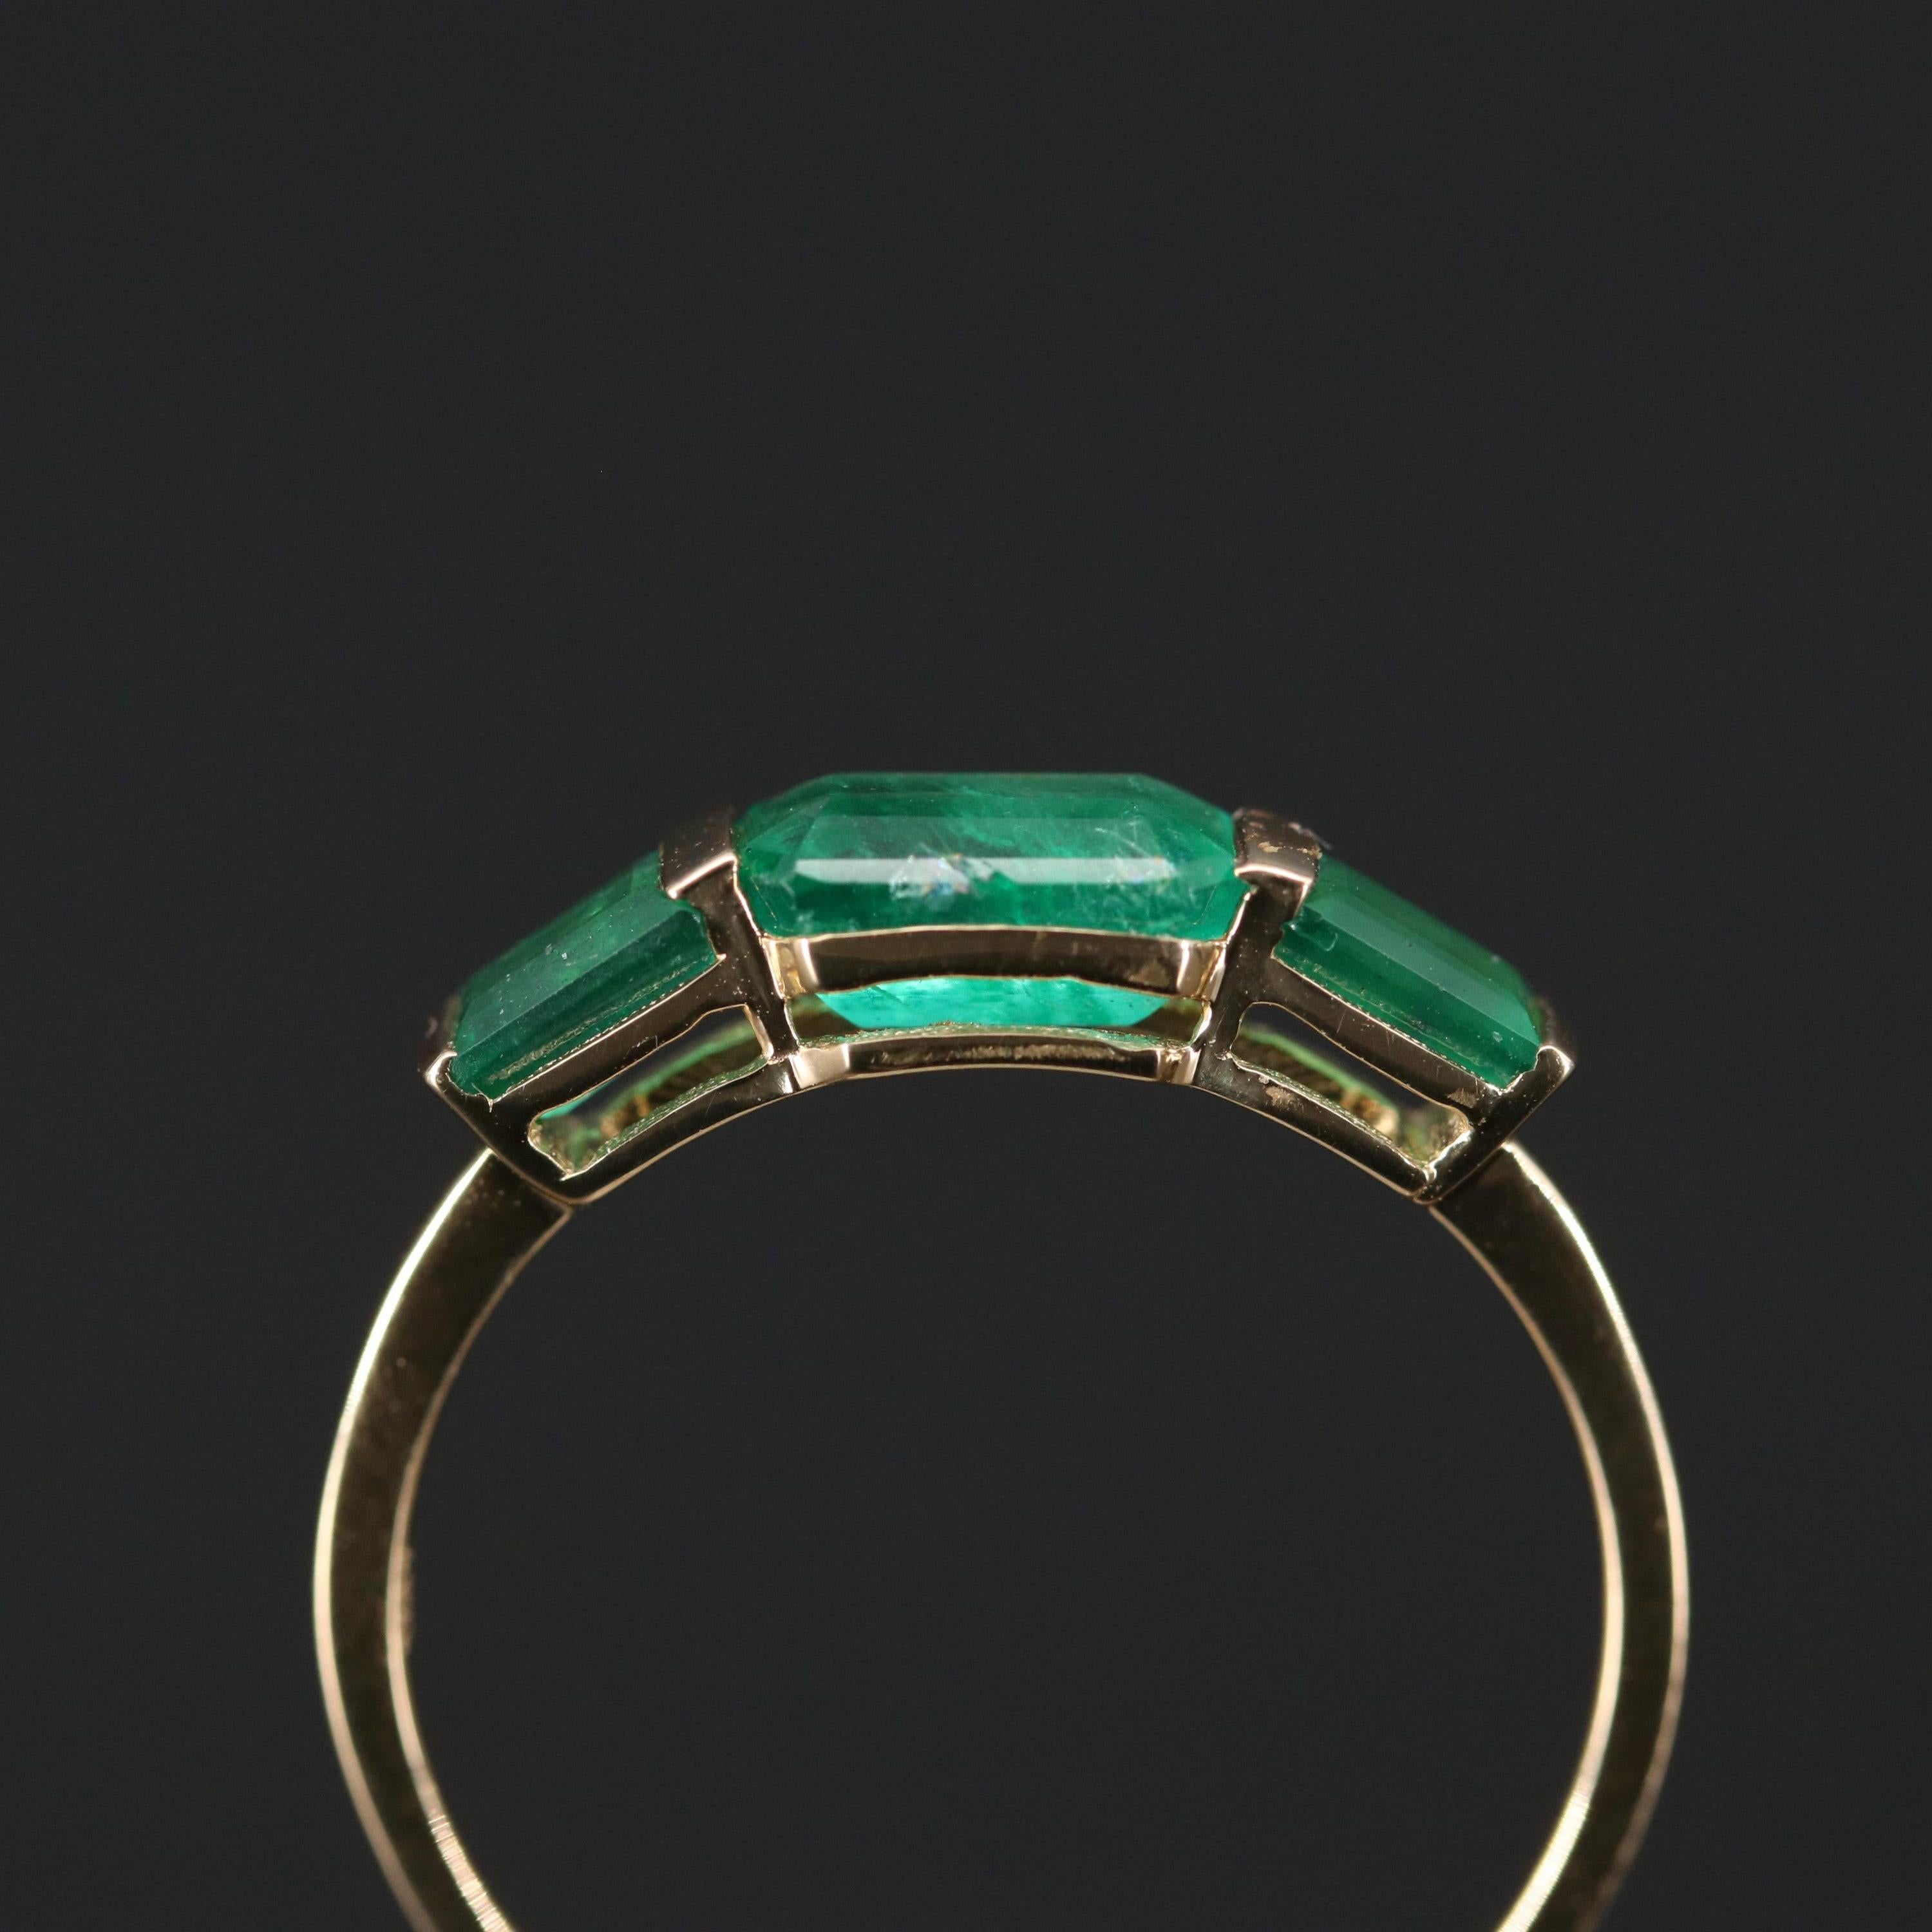 For Sale:  18K Gold 3 CT Natural Emerald Art Deco Style Engagement Ring, Fashion Band Rings 5